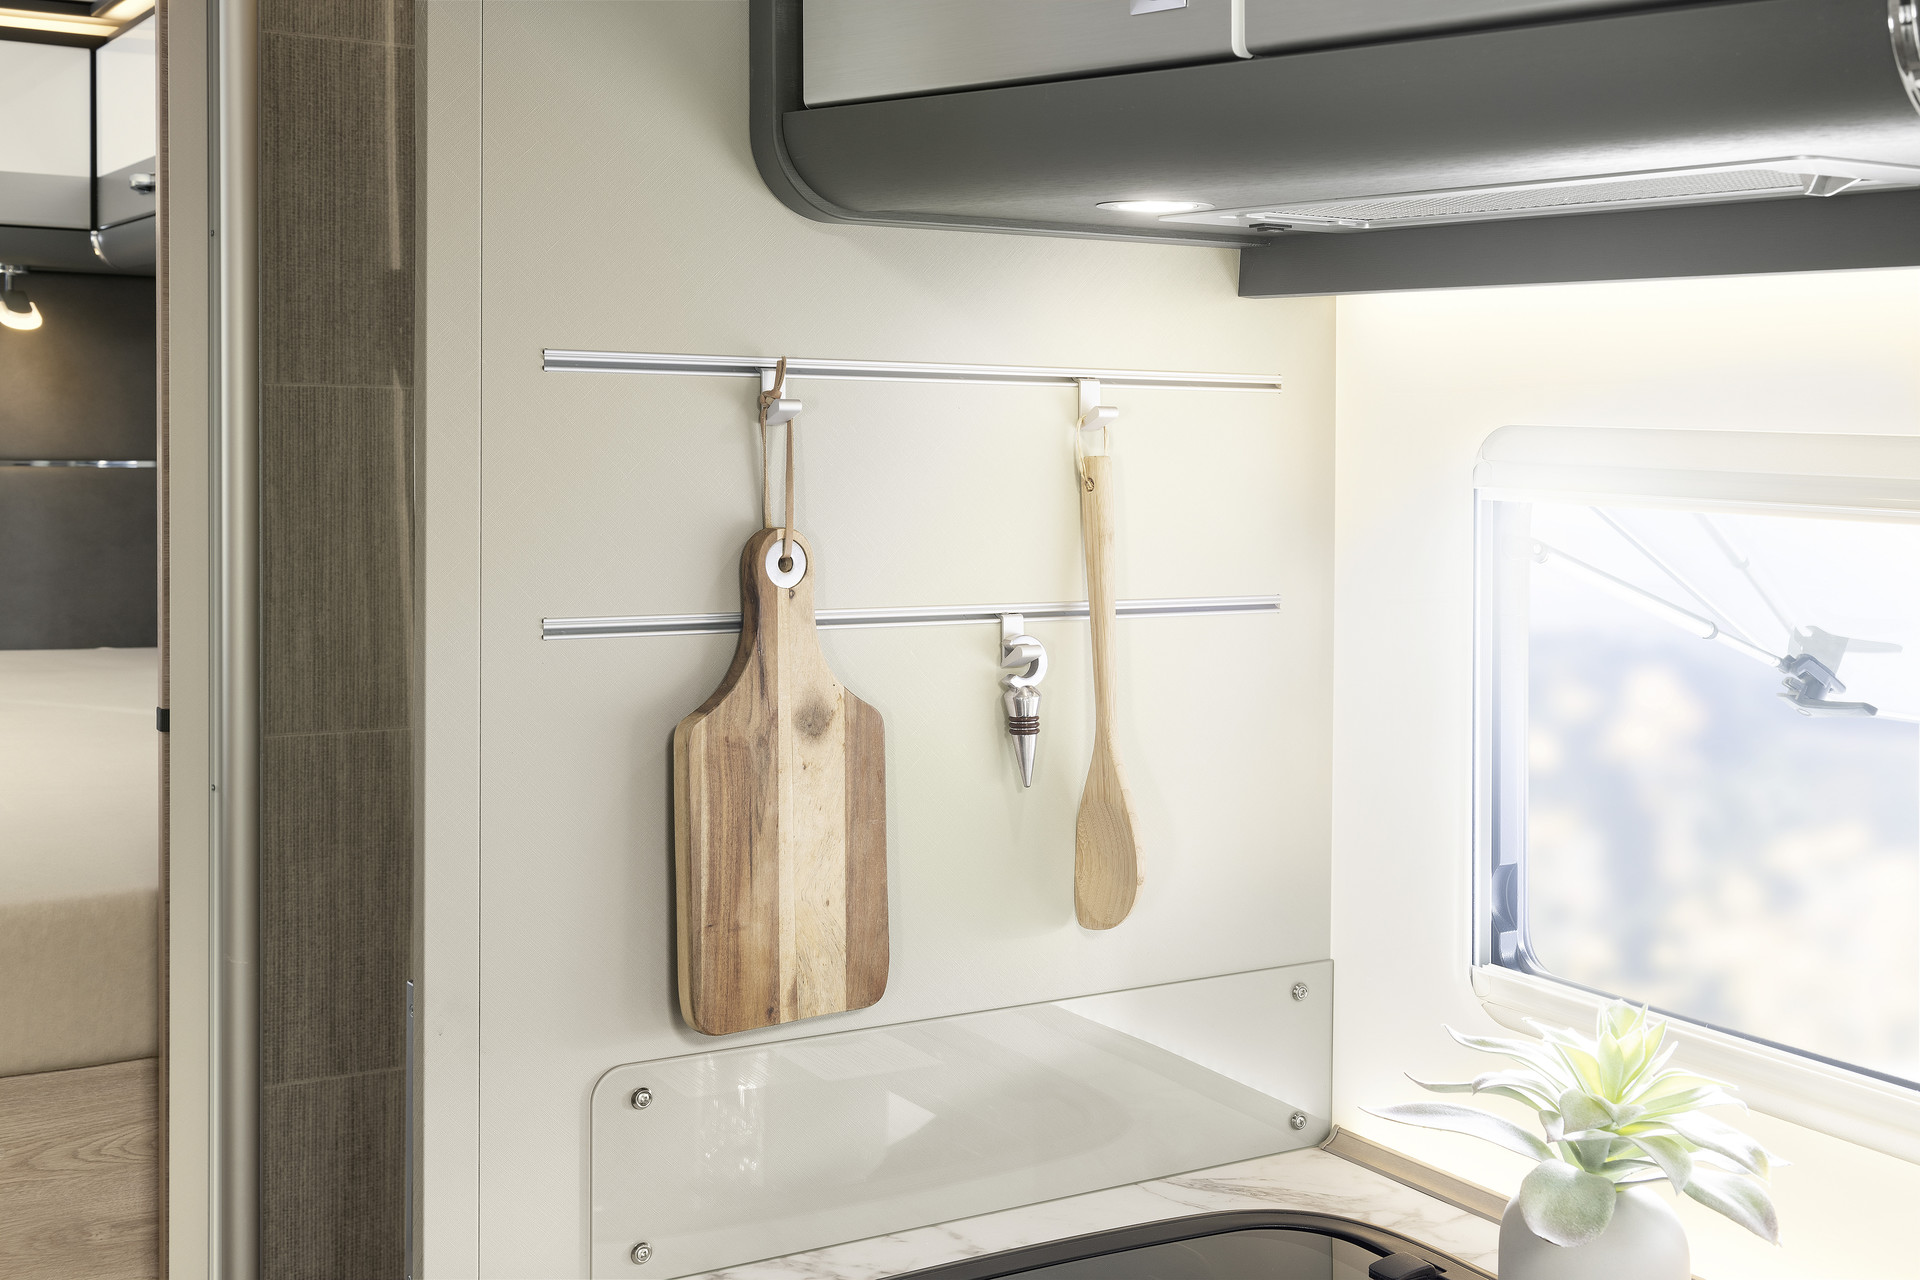 The kitchen boasts a range of practical and stylish solutions, such as the rail system.